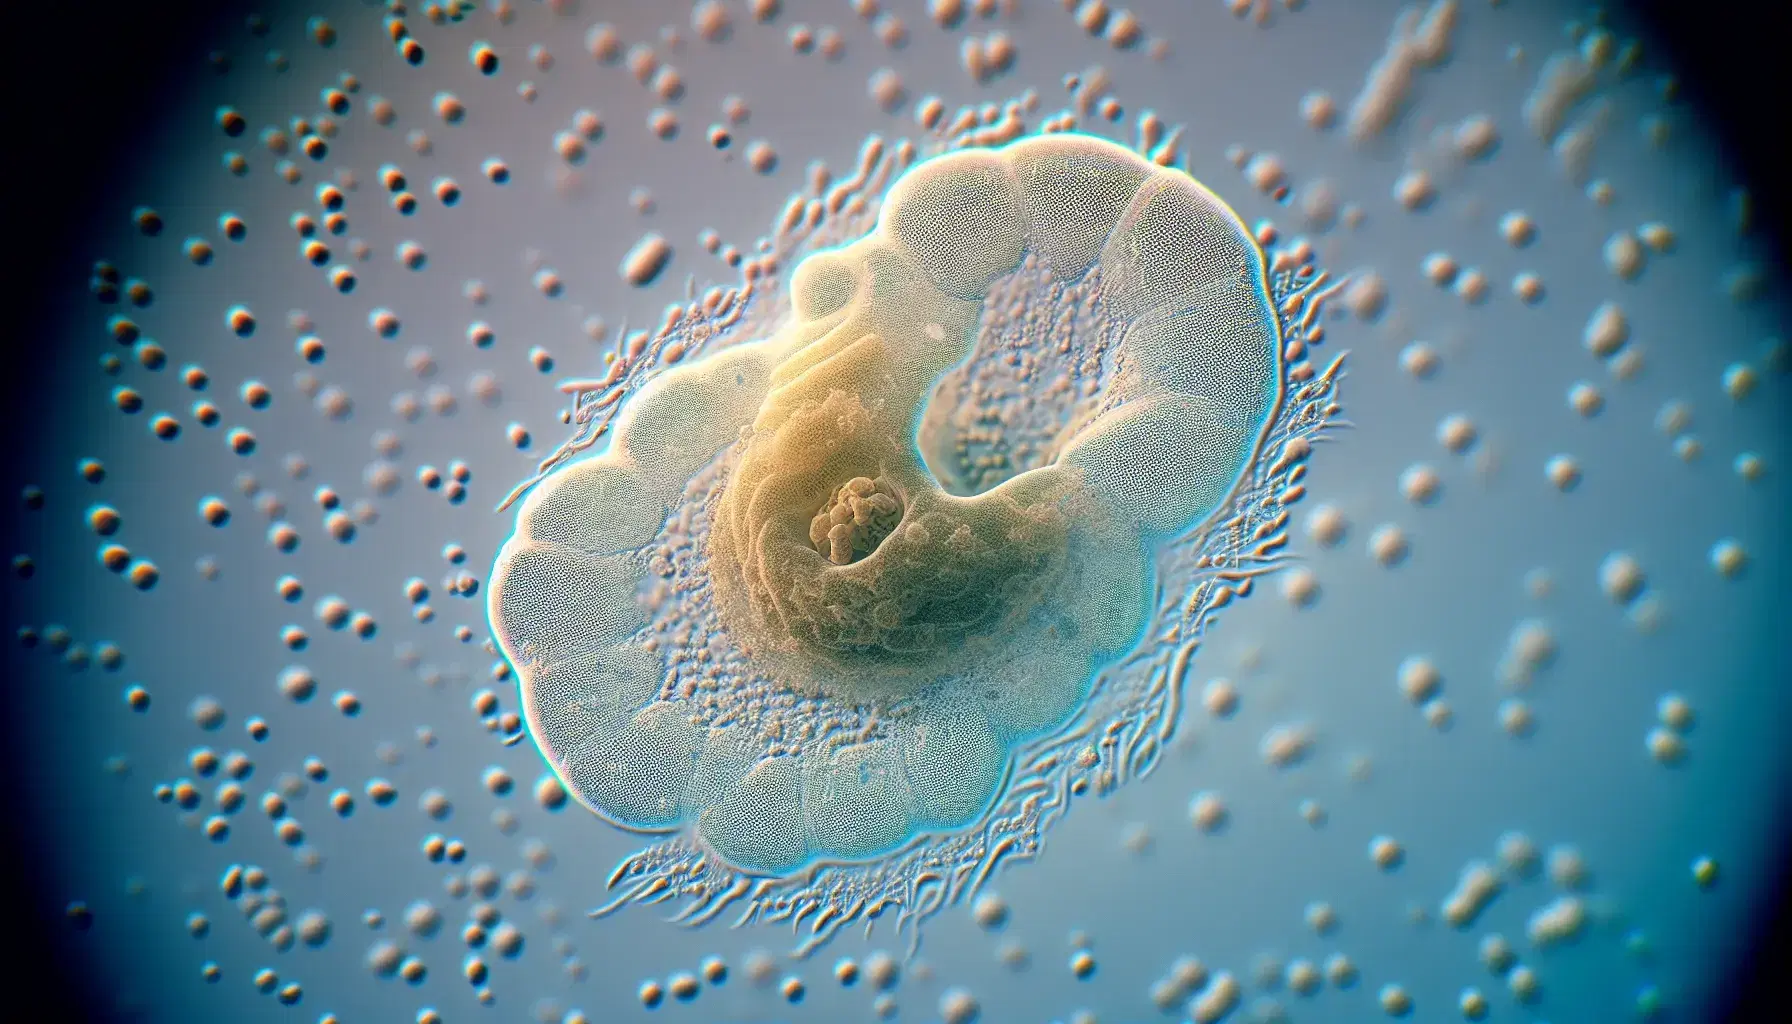 Amoeba proteus undergoing binary fission, with elongating nucleus and extended pseudopodia, against a soft blue microscopic slide background.